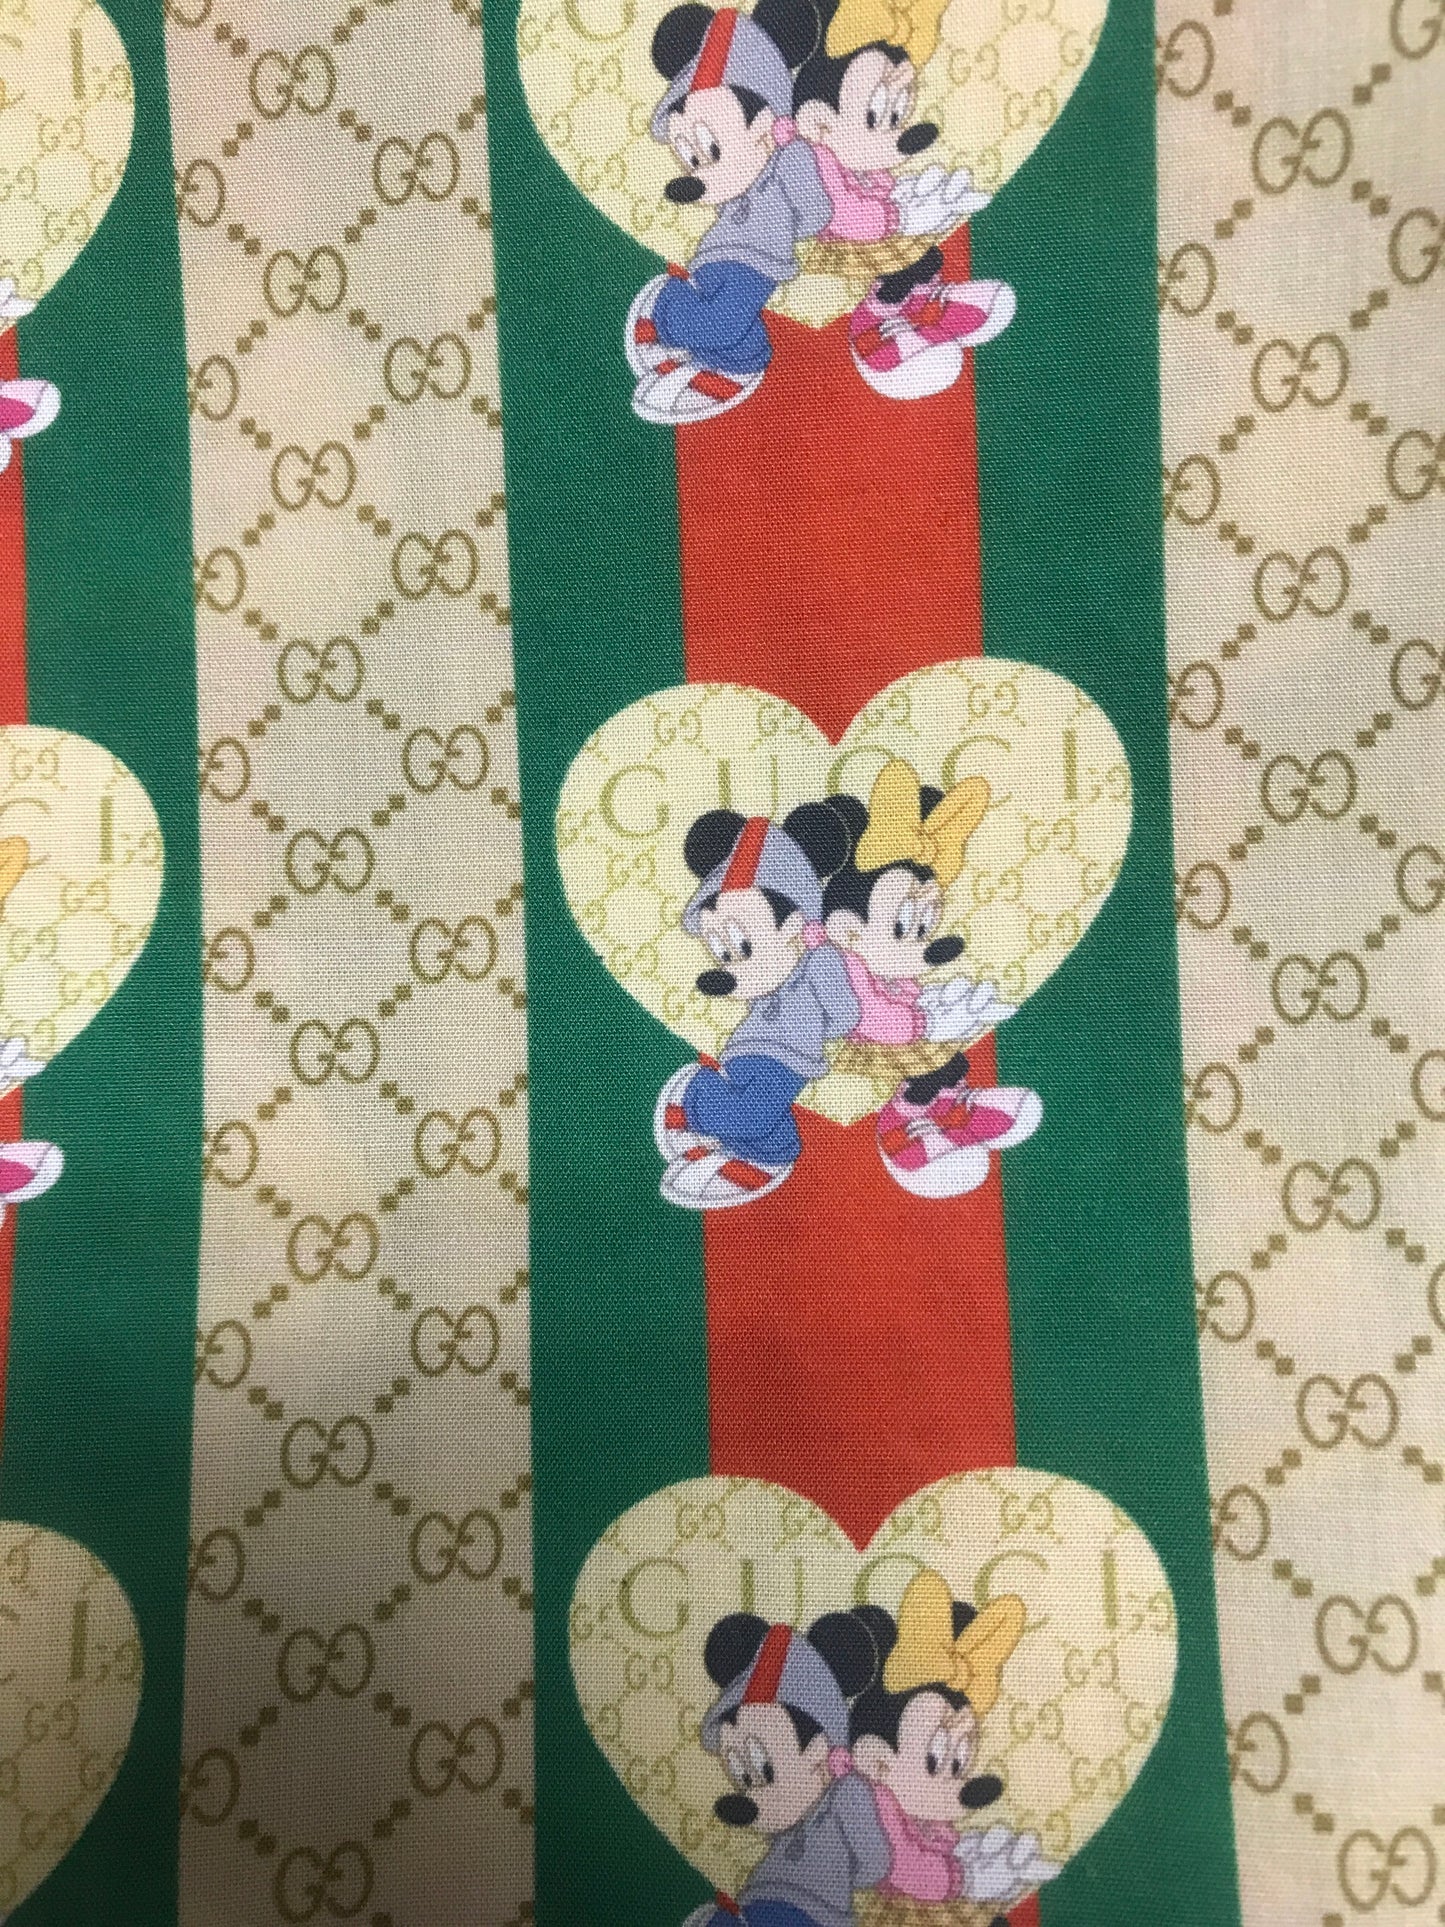 Famous Designer Disney's Mickey Mouse & Minnie Mouse & Gucci GG  Fabric